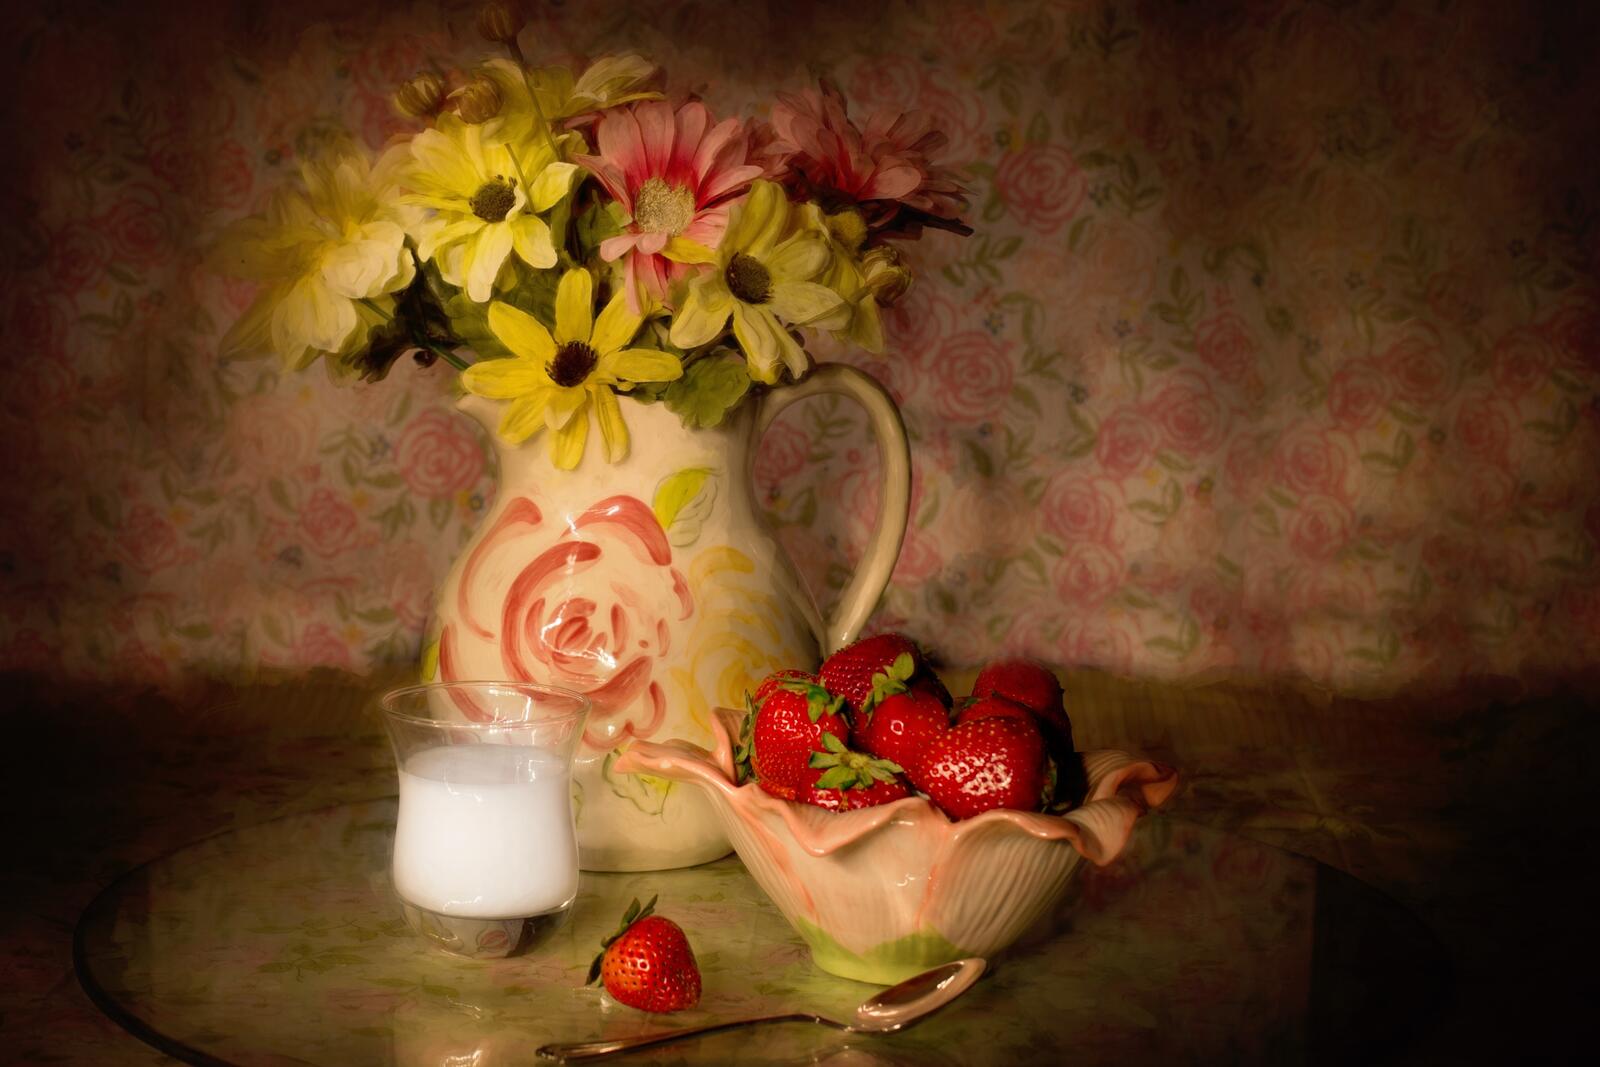 Free photo Flowers in a pitcher on a table with strawberries.